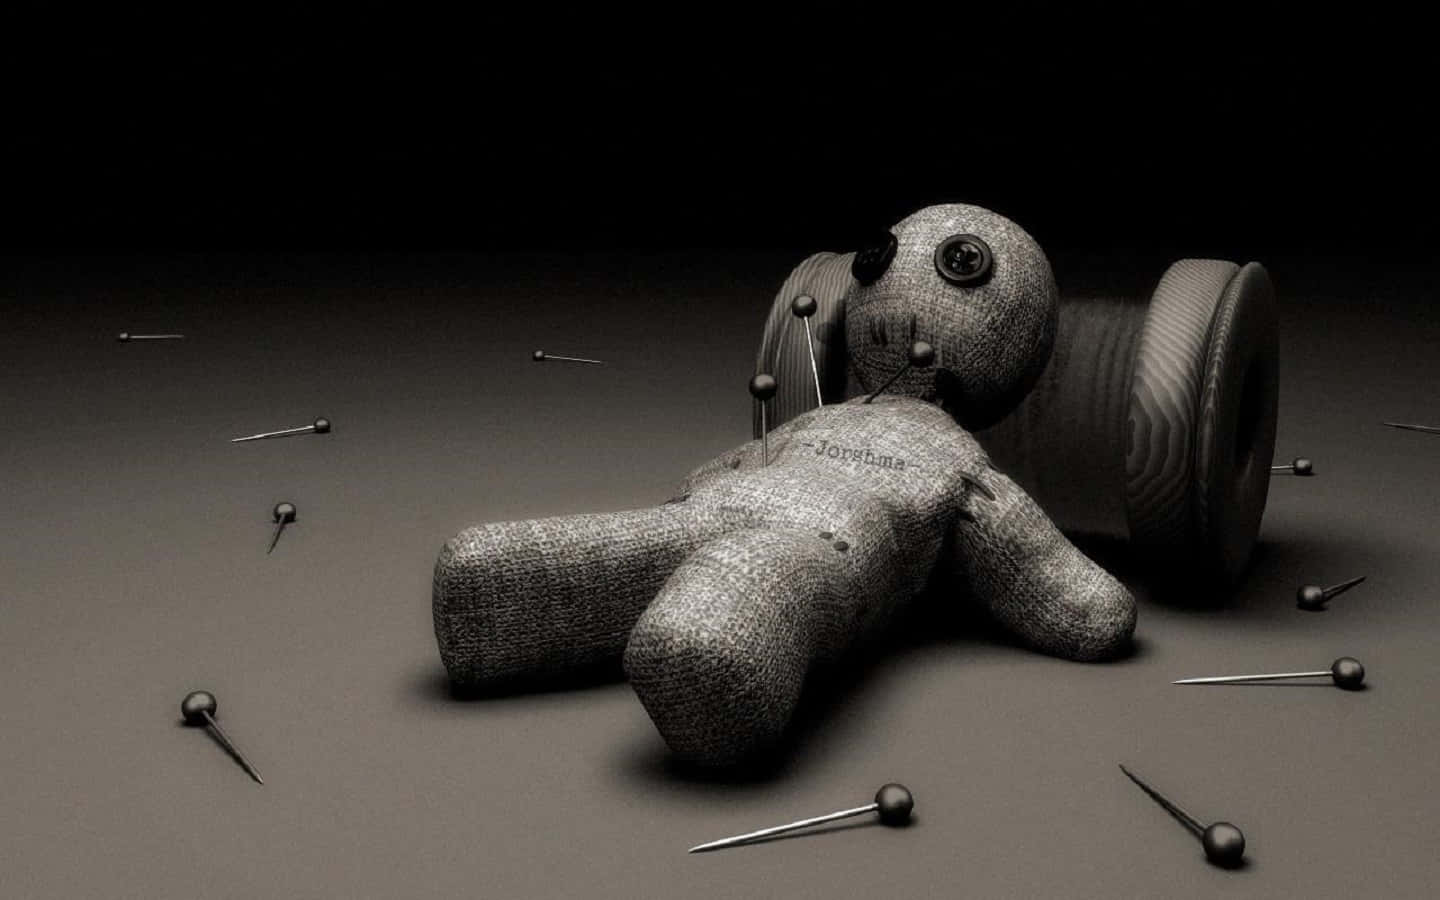 Three mysterious Voodoo Dolls on a wooden surface Wallpaper